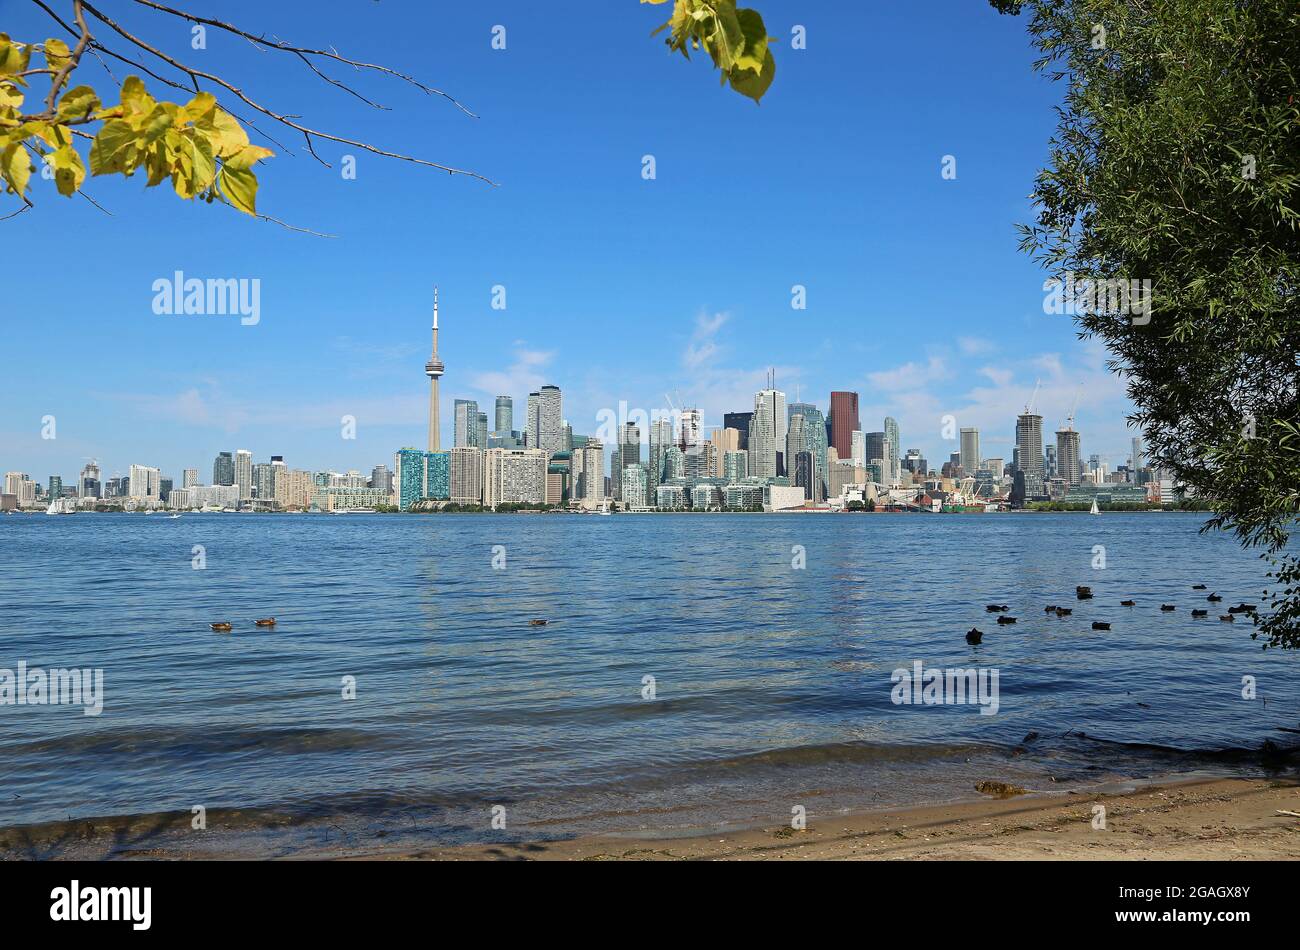 Standing on the shore of Toronto Island, Canada Stock Photo